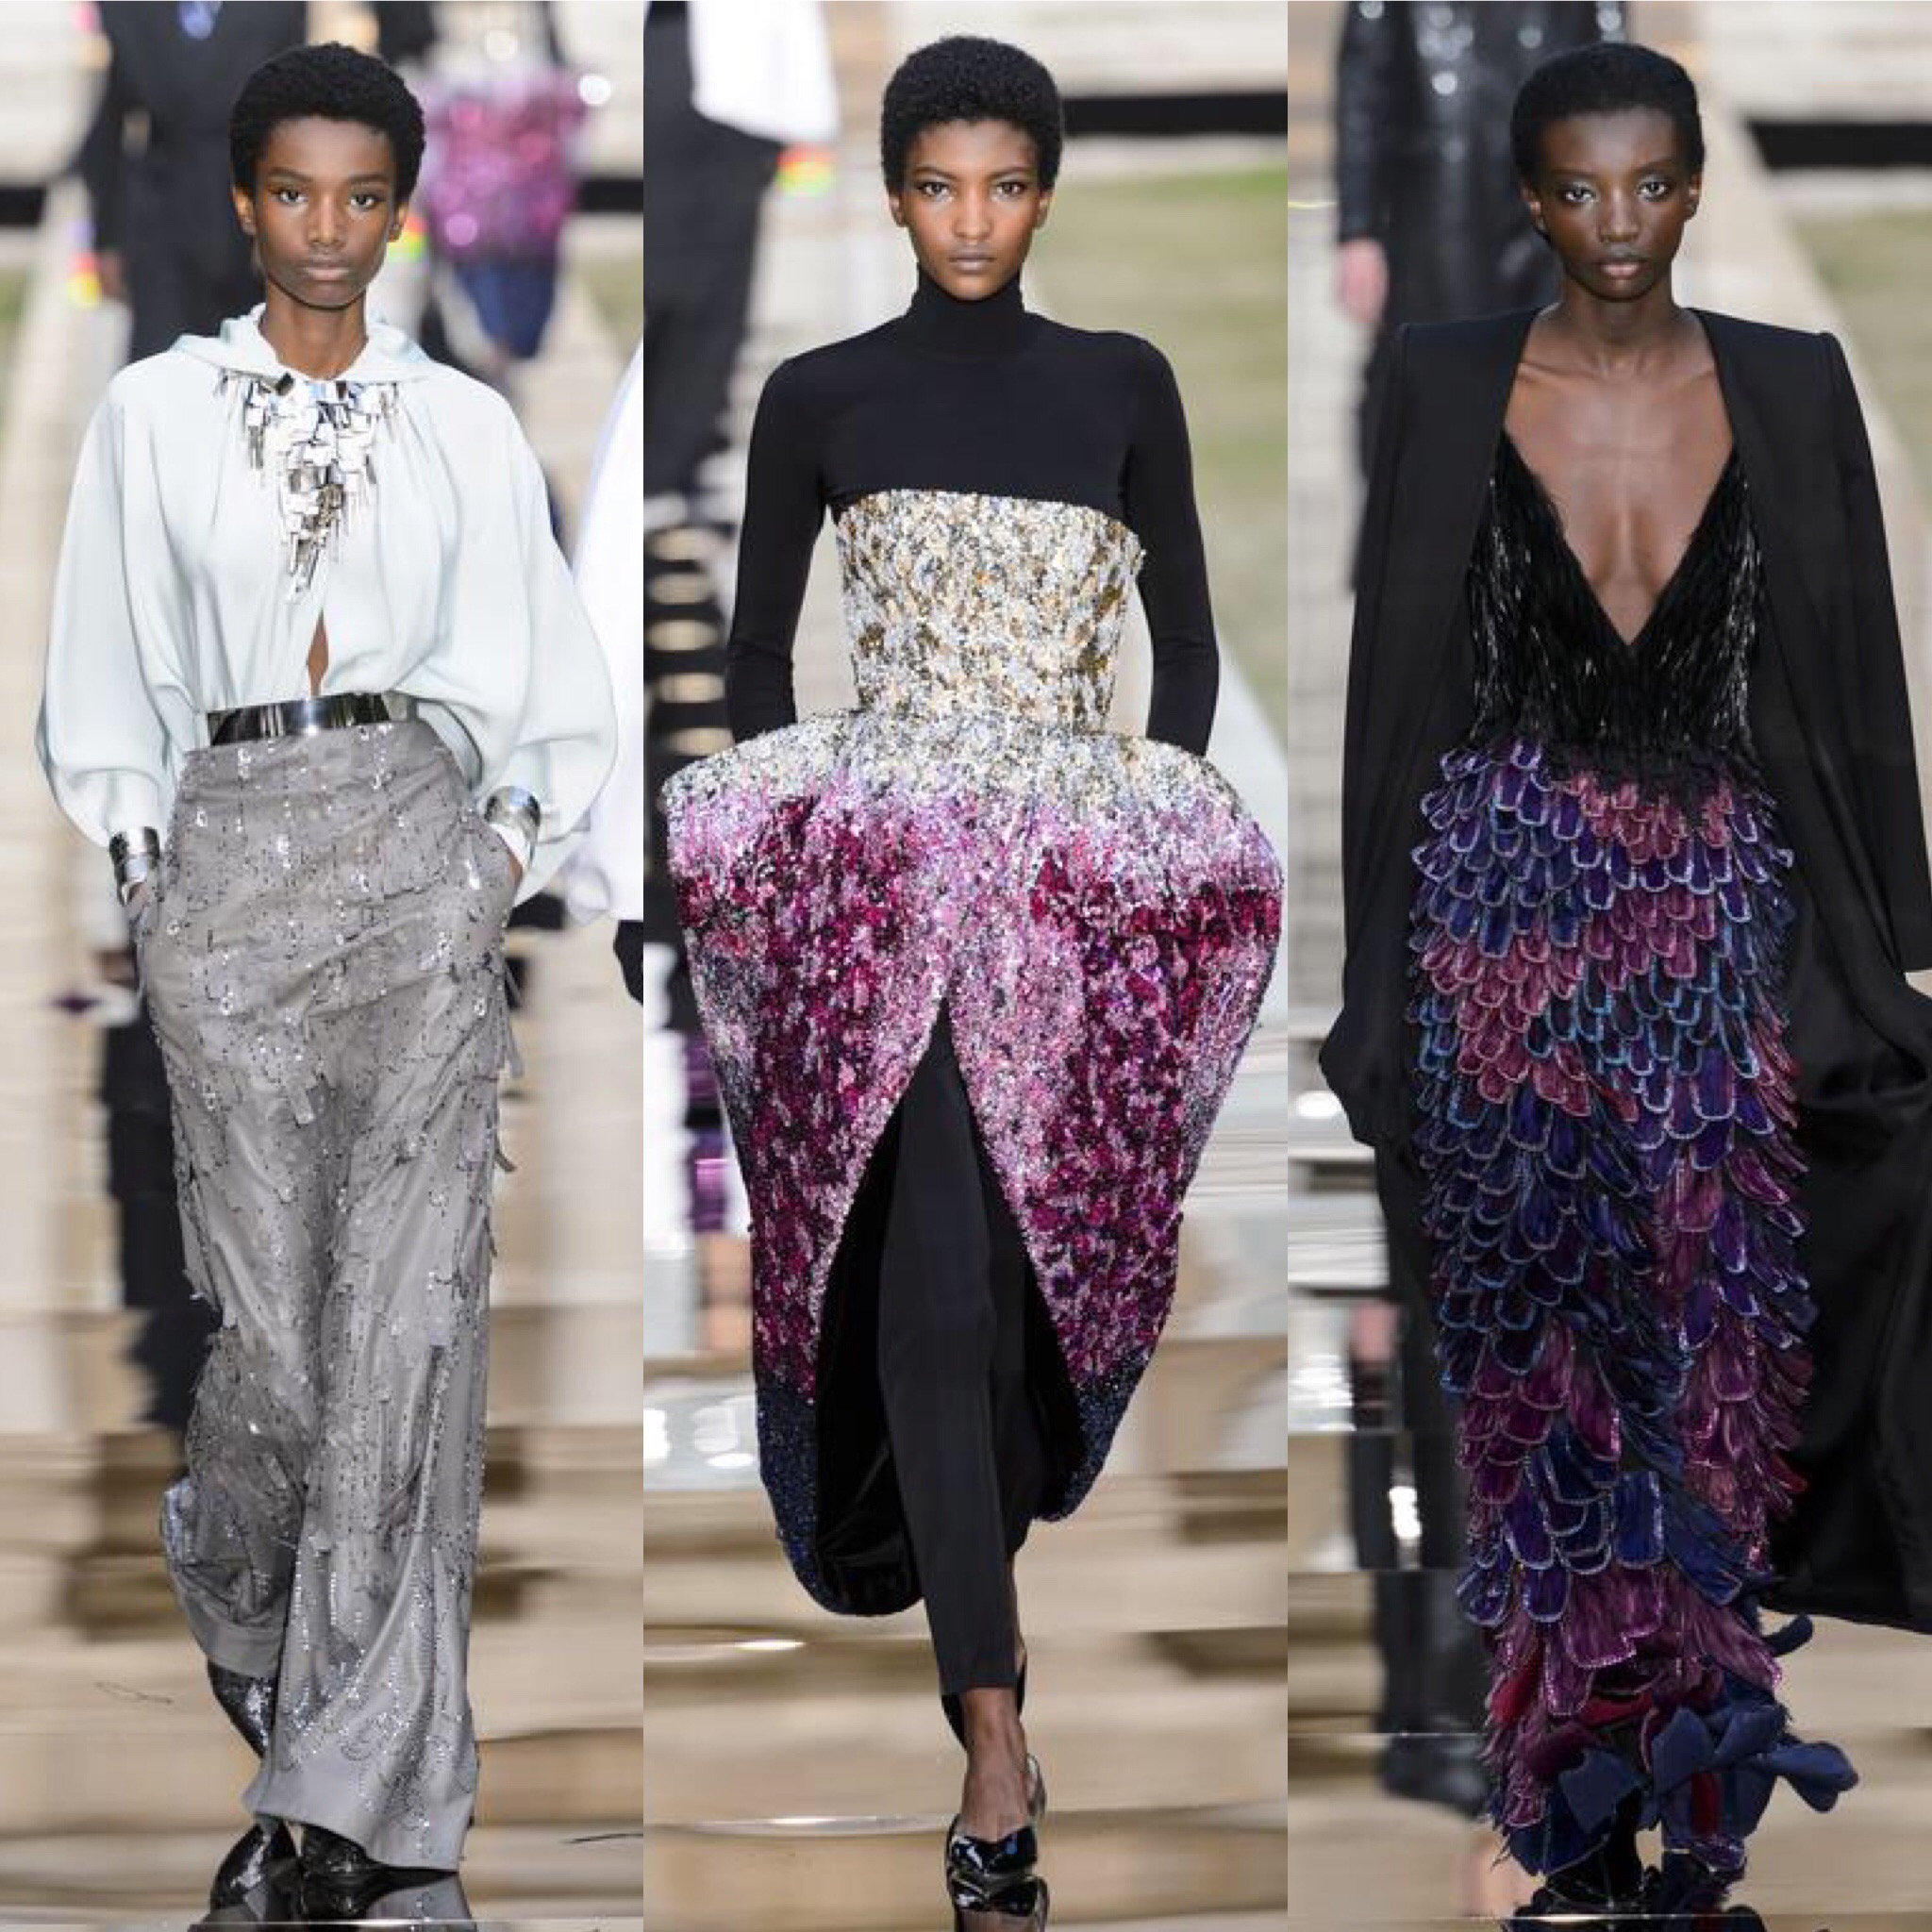 Givenchy Automne-hiver 2019-2020 - Haute couture